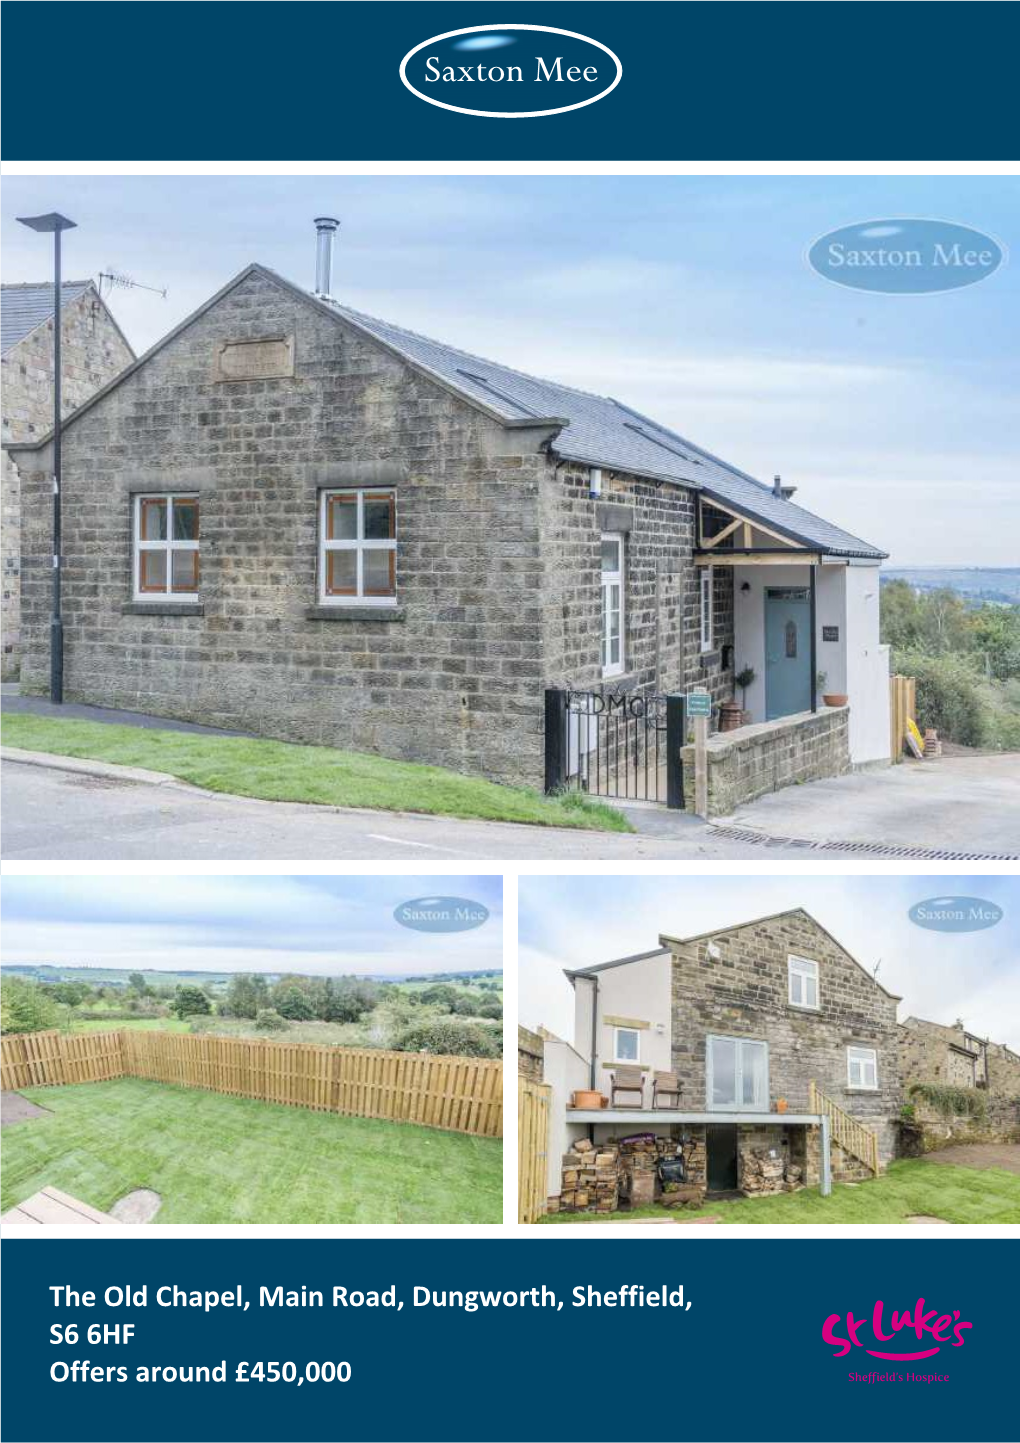 The Old Chapel, Main Road, Dungworth, Sheffield, S6 6HF